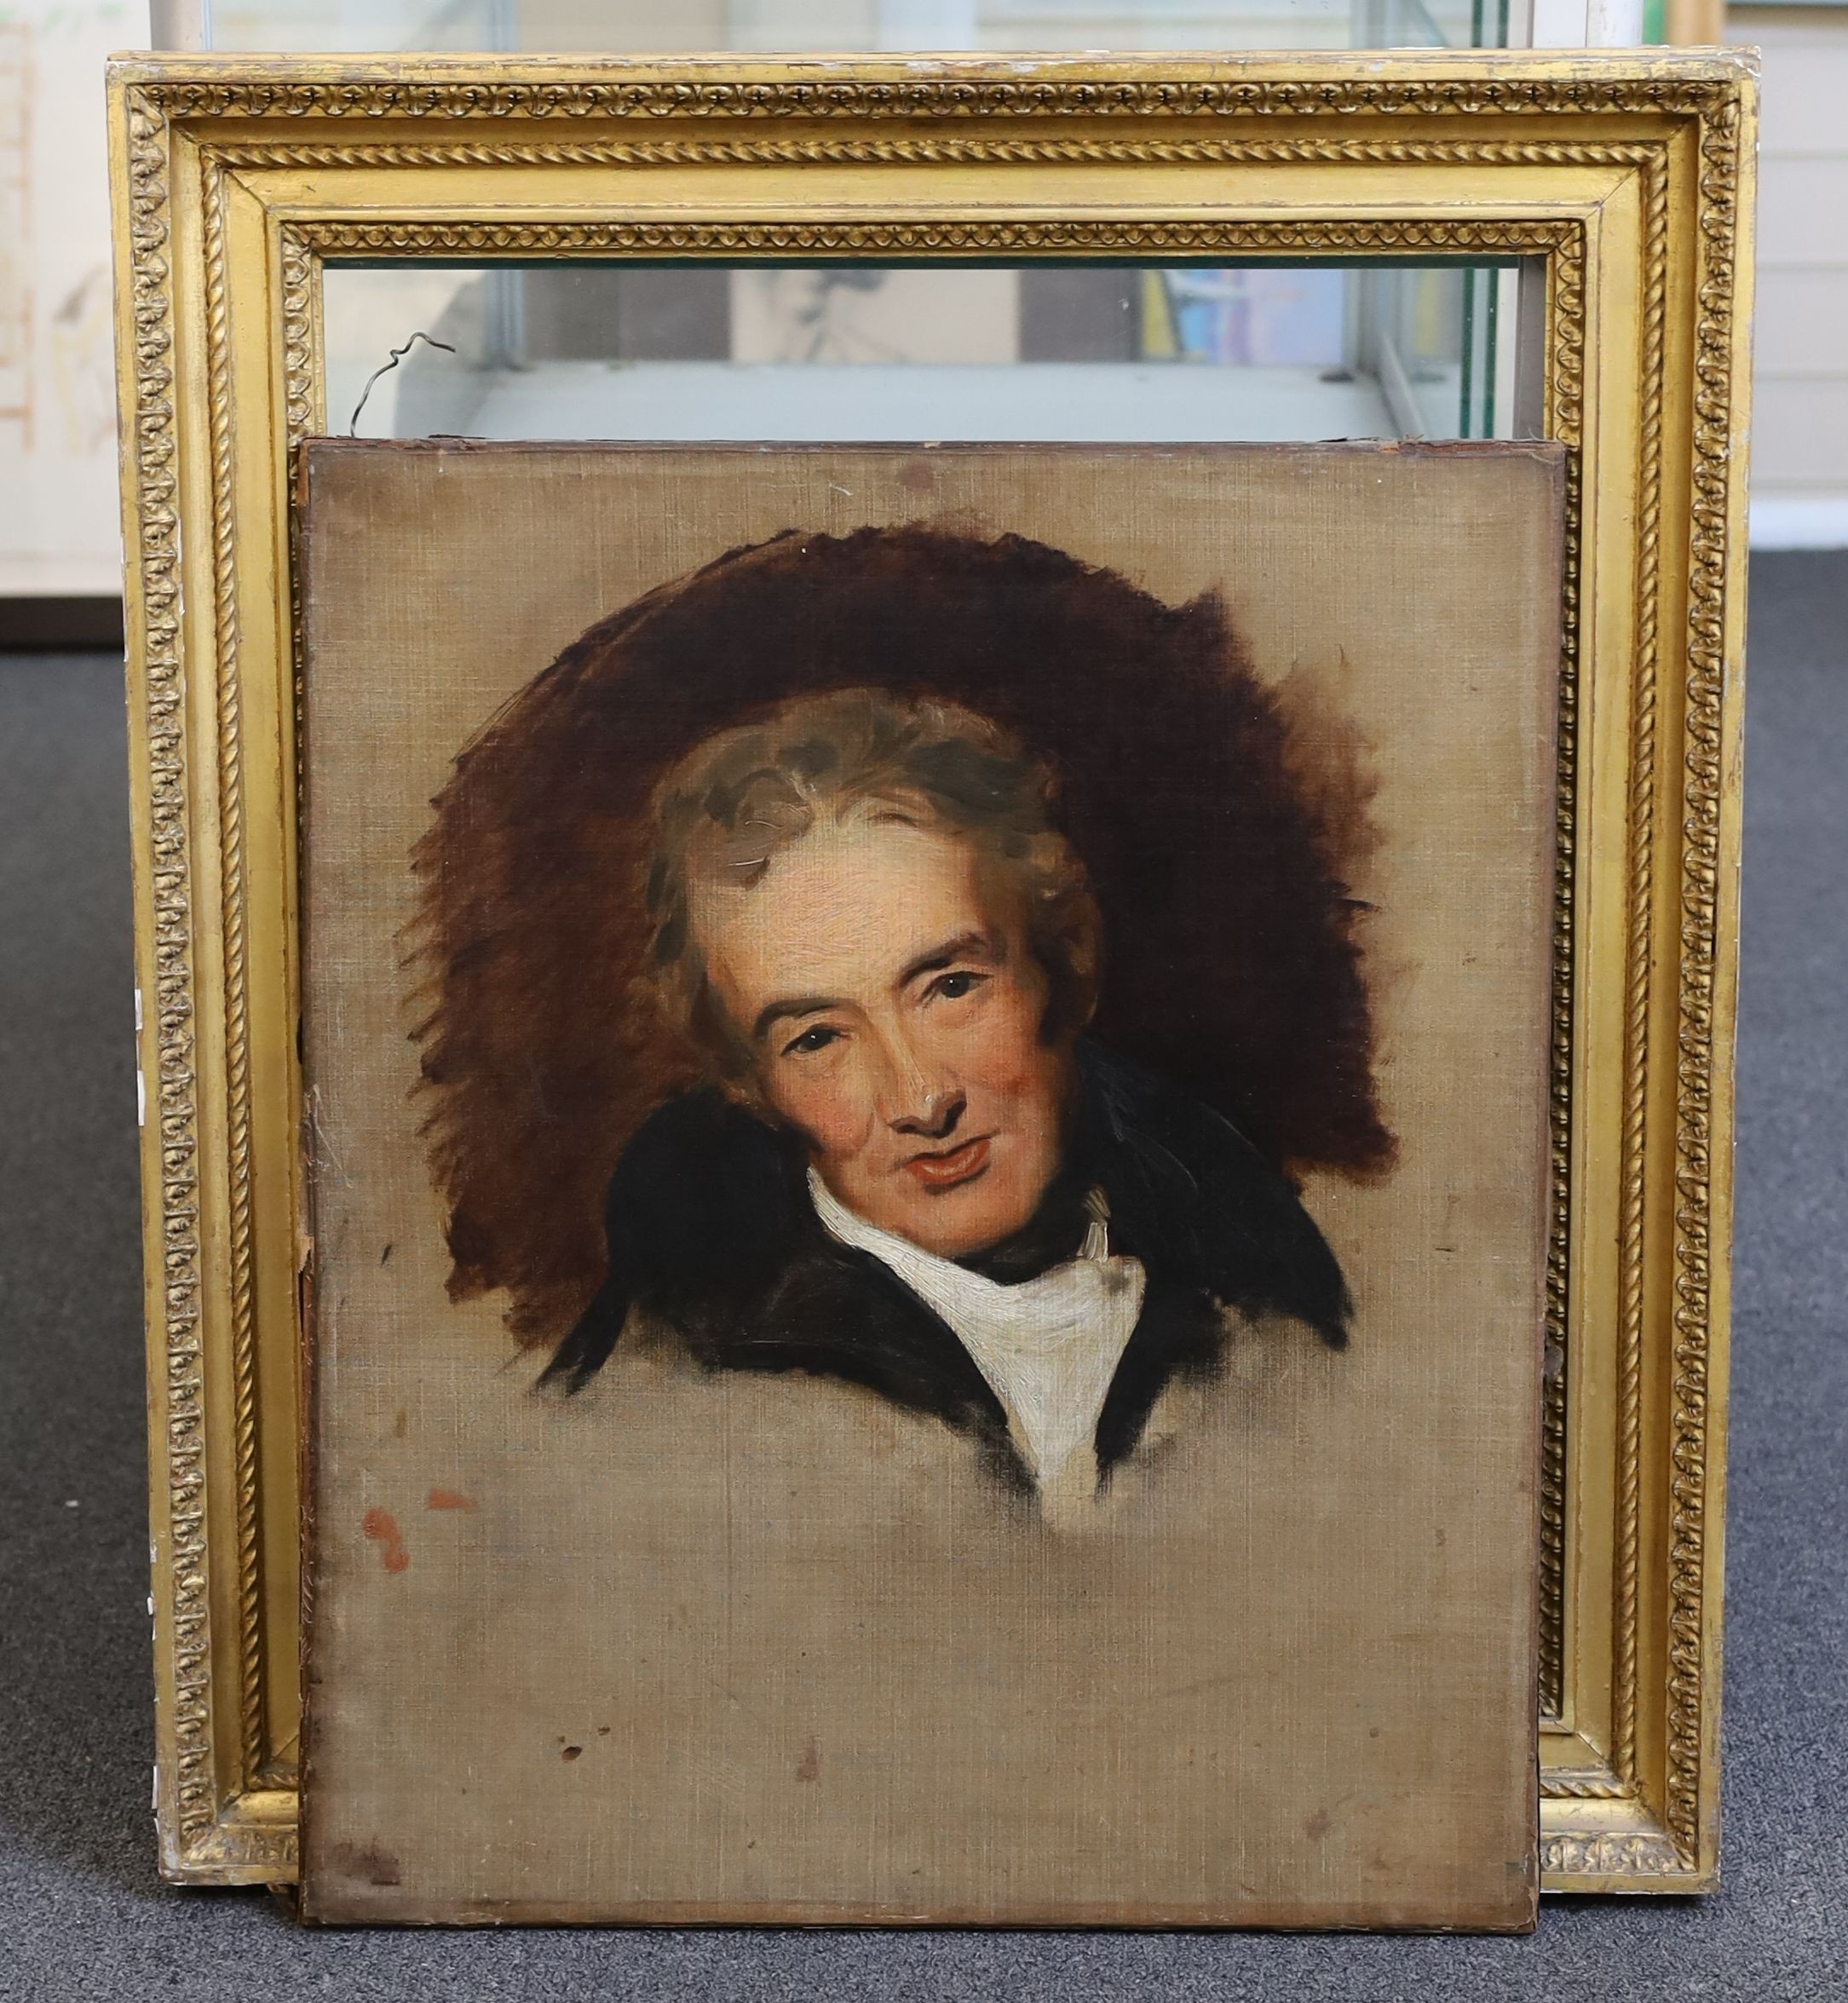 After Sir Thomas Lawrence (1769-1830), Portrait of William Wilberforce MP, oil on canvas, 60 x 50cm